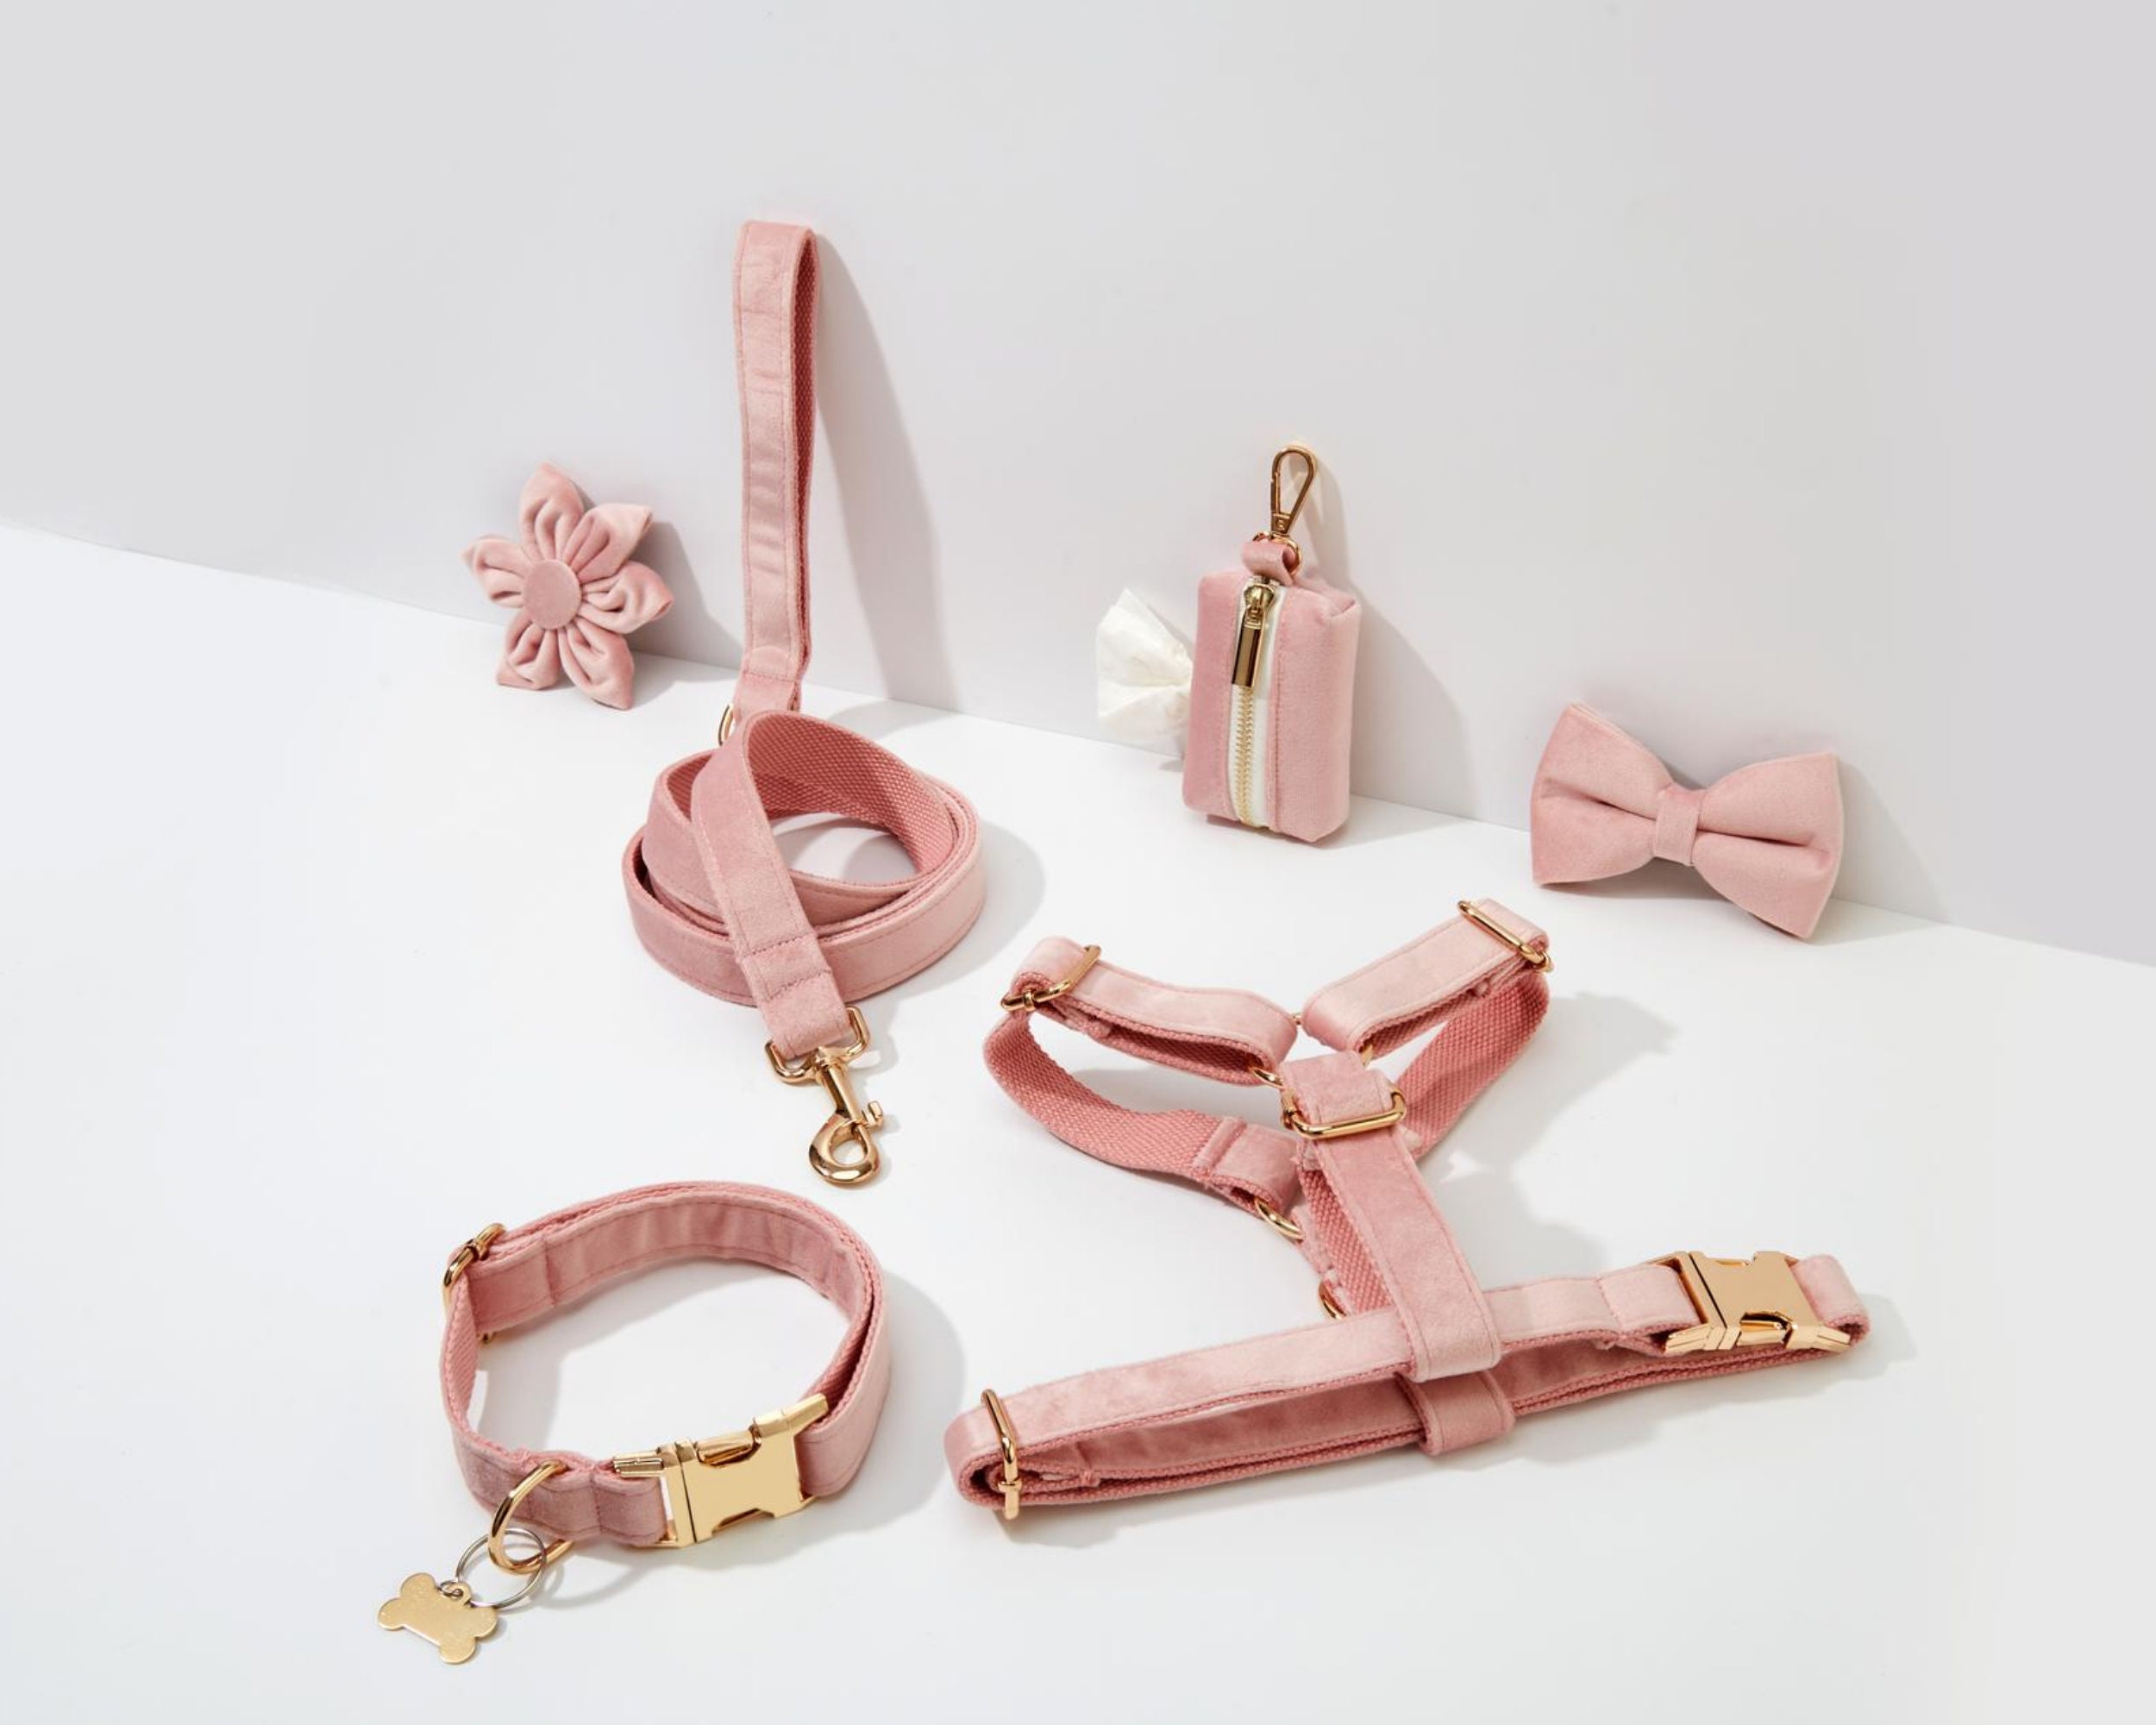 The Purrfectly Pink Iridescent Limited-Edition Harness & Leash Set